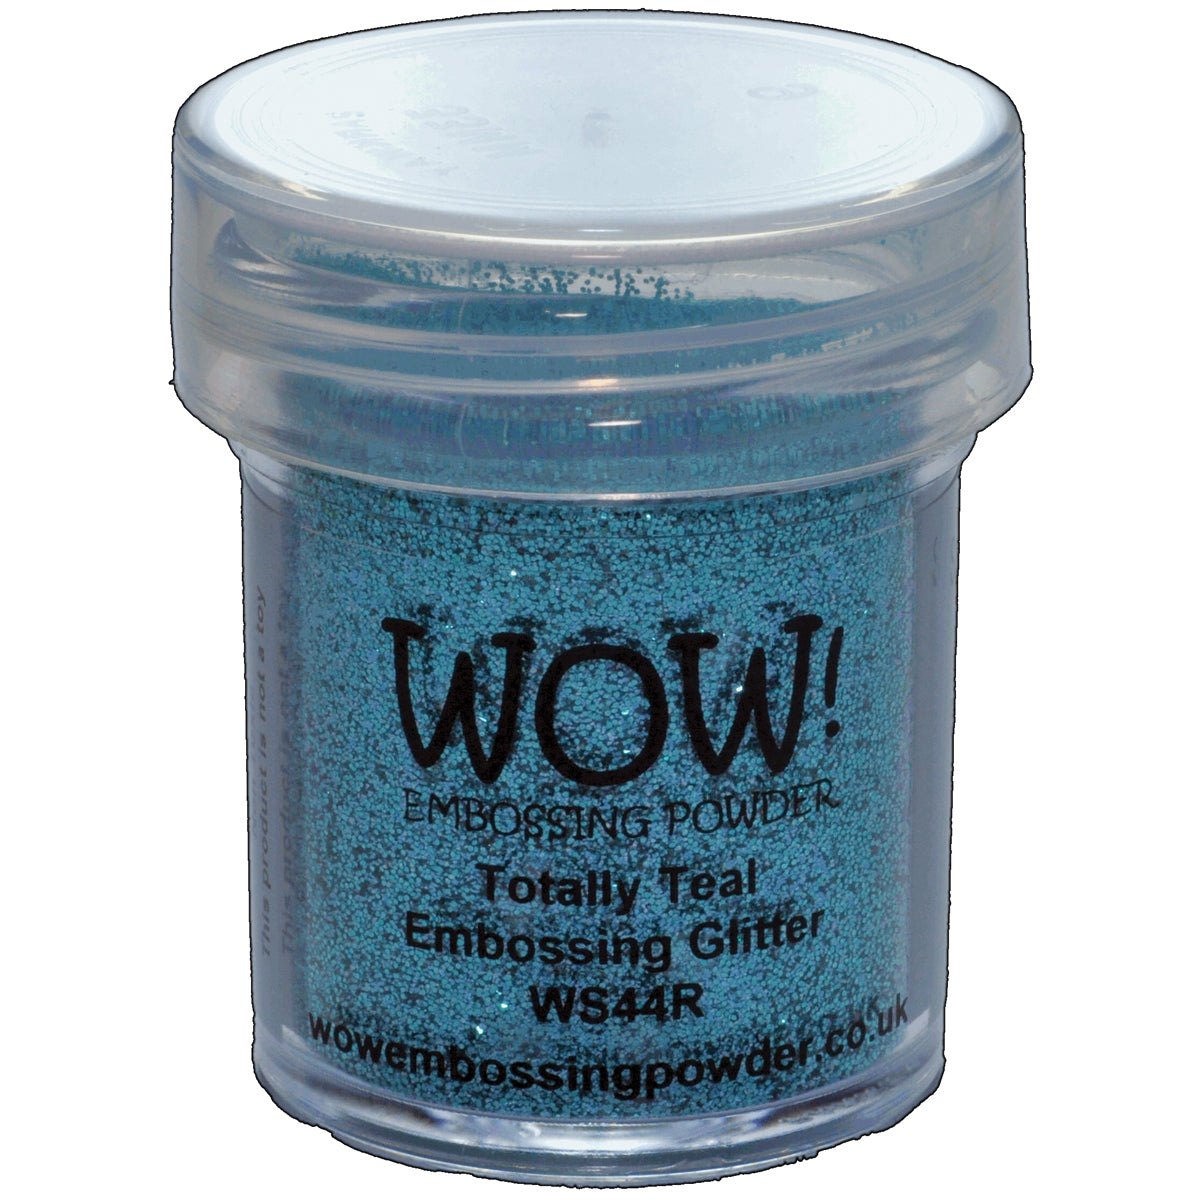 Wow Totally Teal Opaque Glitter Embossing Powder